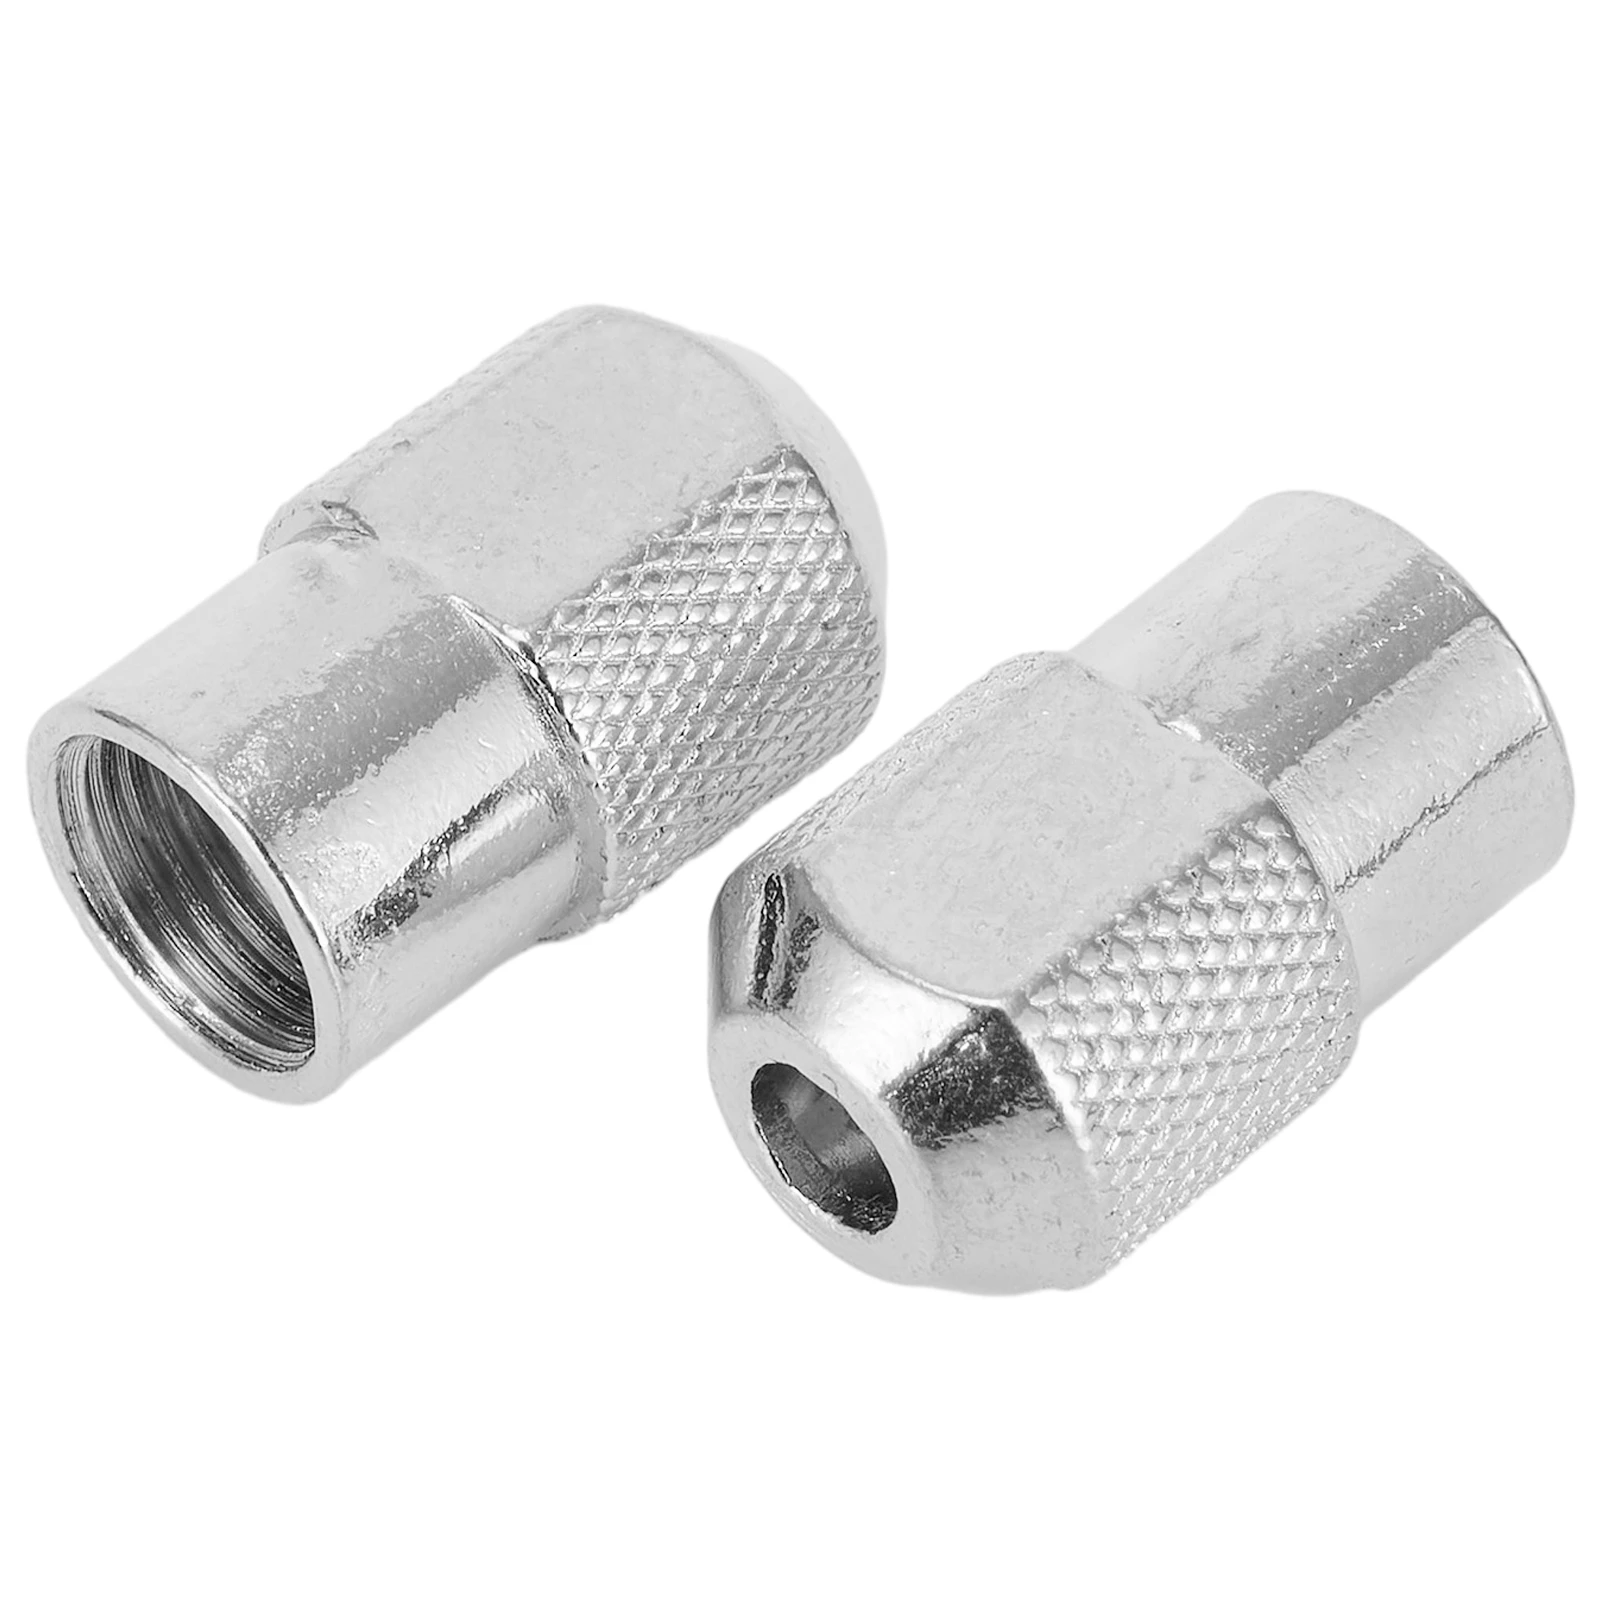 5pcs chuck nut kit m8x0 75mm small drill chuck nut zinc alloy rotary tool accessories electric grinder part drill chuck adapter 5pcs M8X0.75mm Drill Chuck Electric Mill Shaft Screw Cap Nut Collet For Electric Mill Grinder Shaft Rotary Tool Power Tools Acce